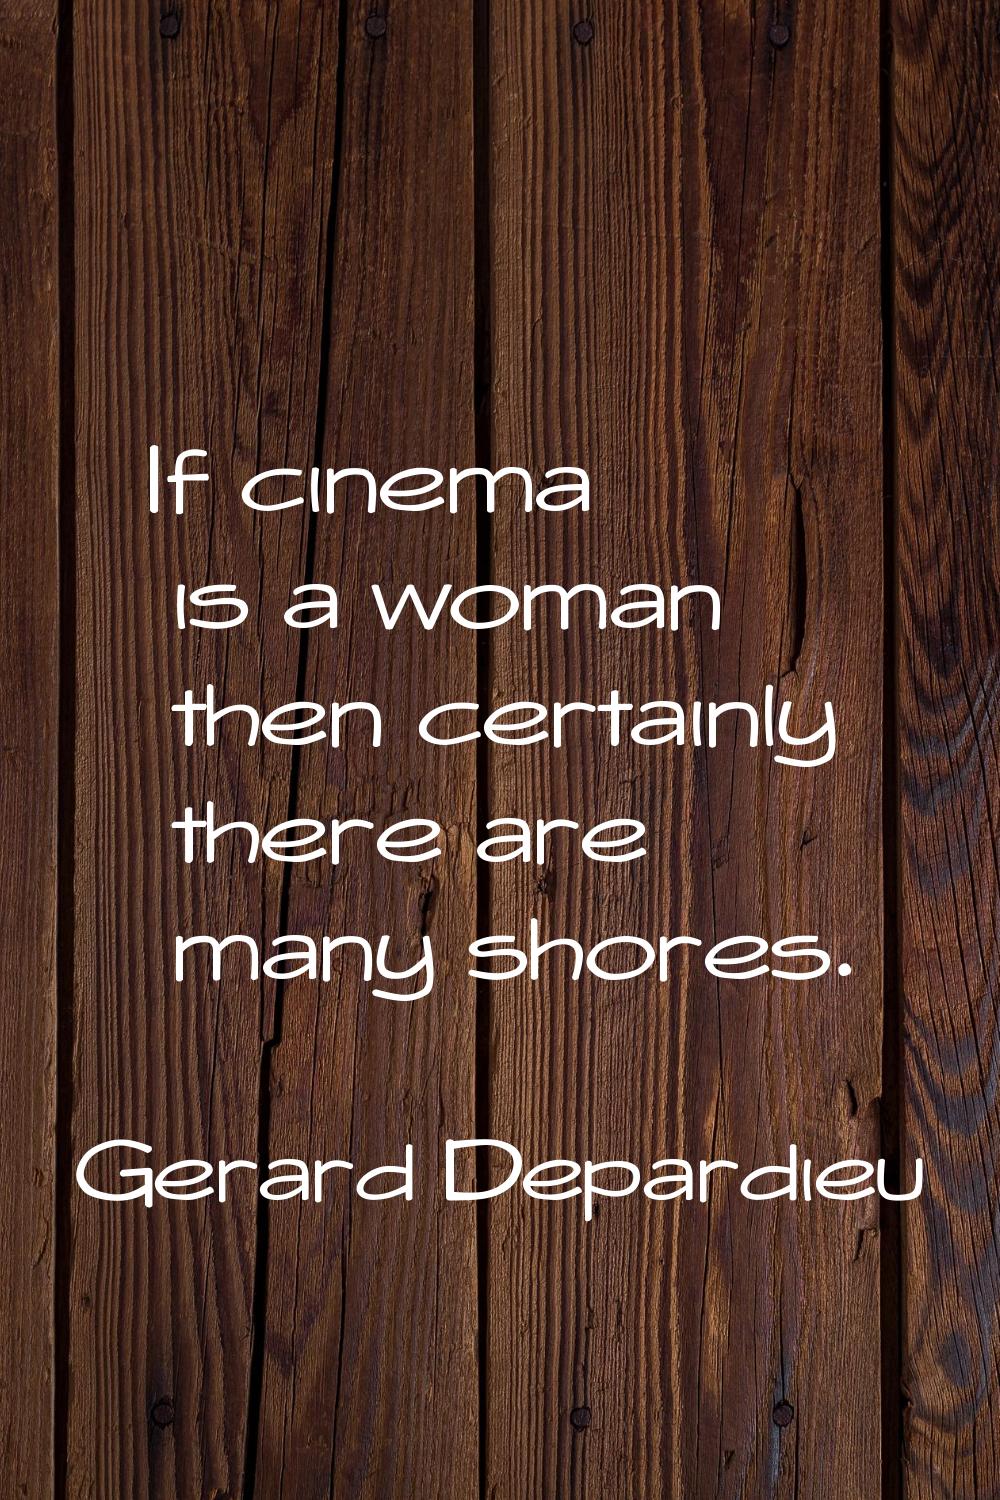 If cinema is a woman then certainly there are many shores.